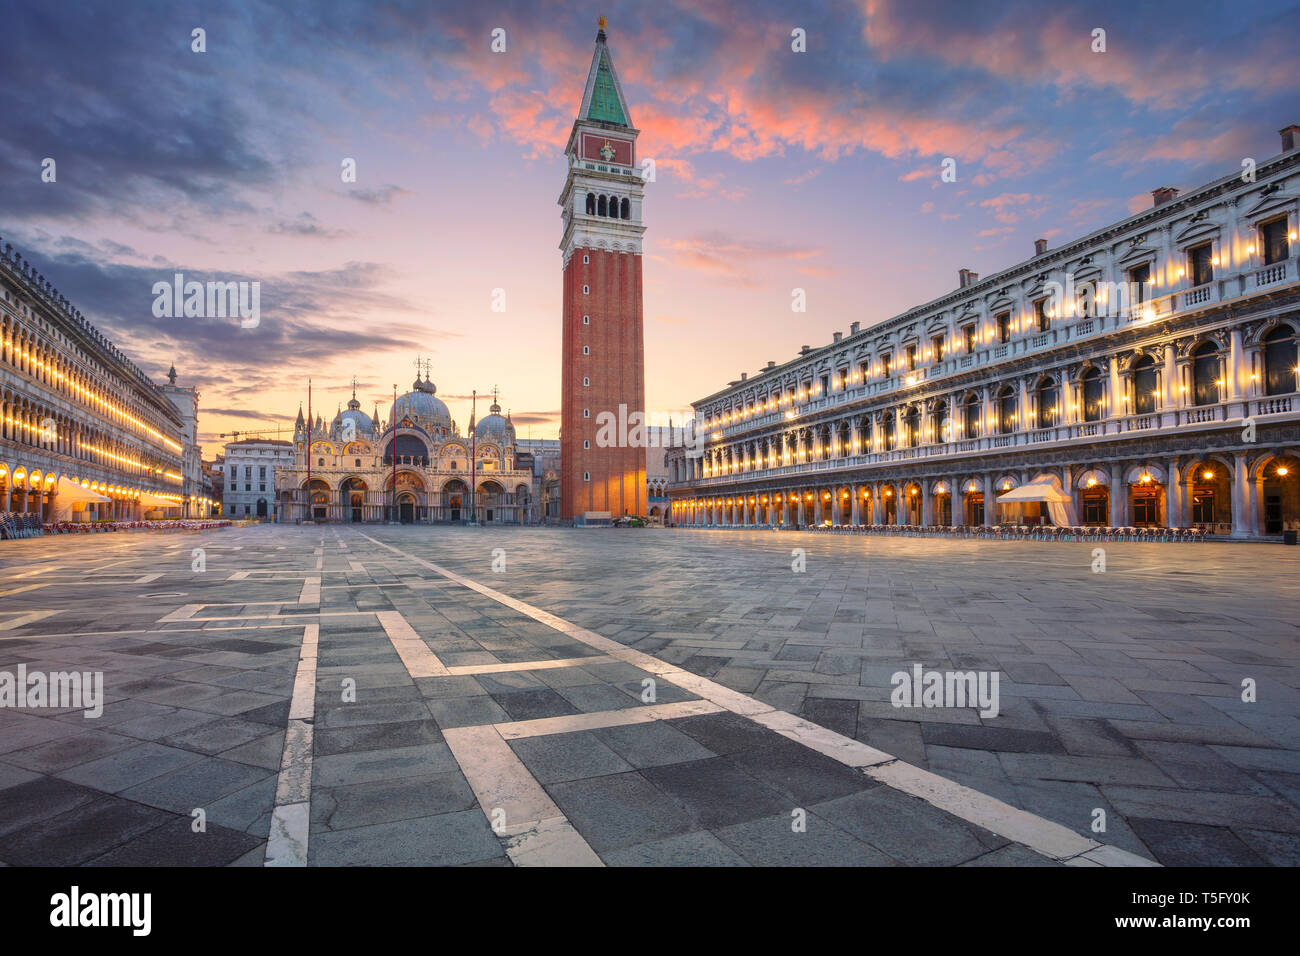 Venice, Italy. Cityscape image of St. Mark's square in Venice, Italy during sunrise. Stock Photo